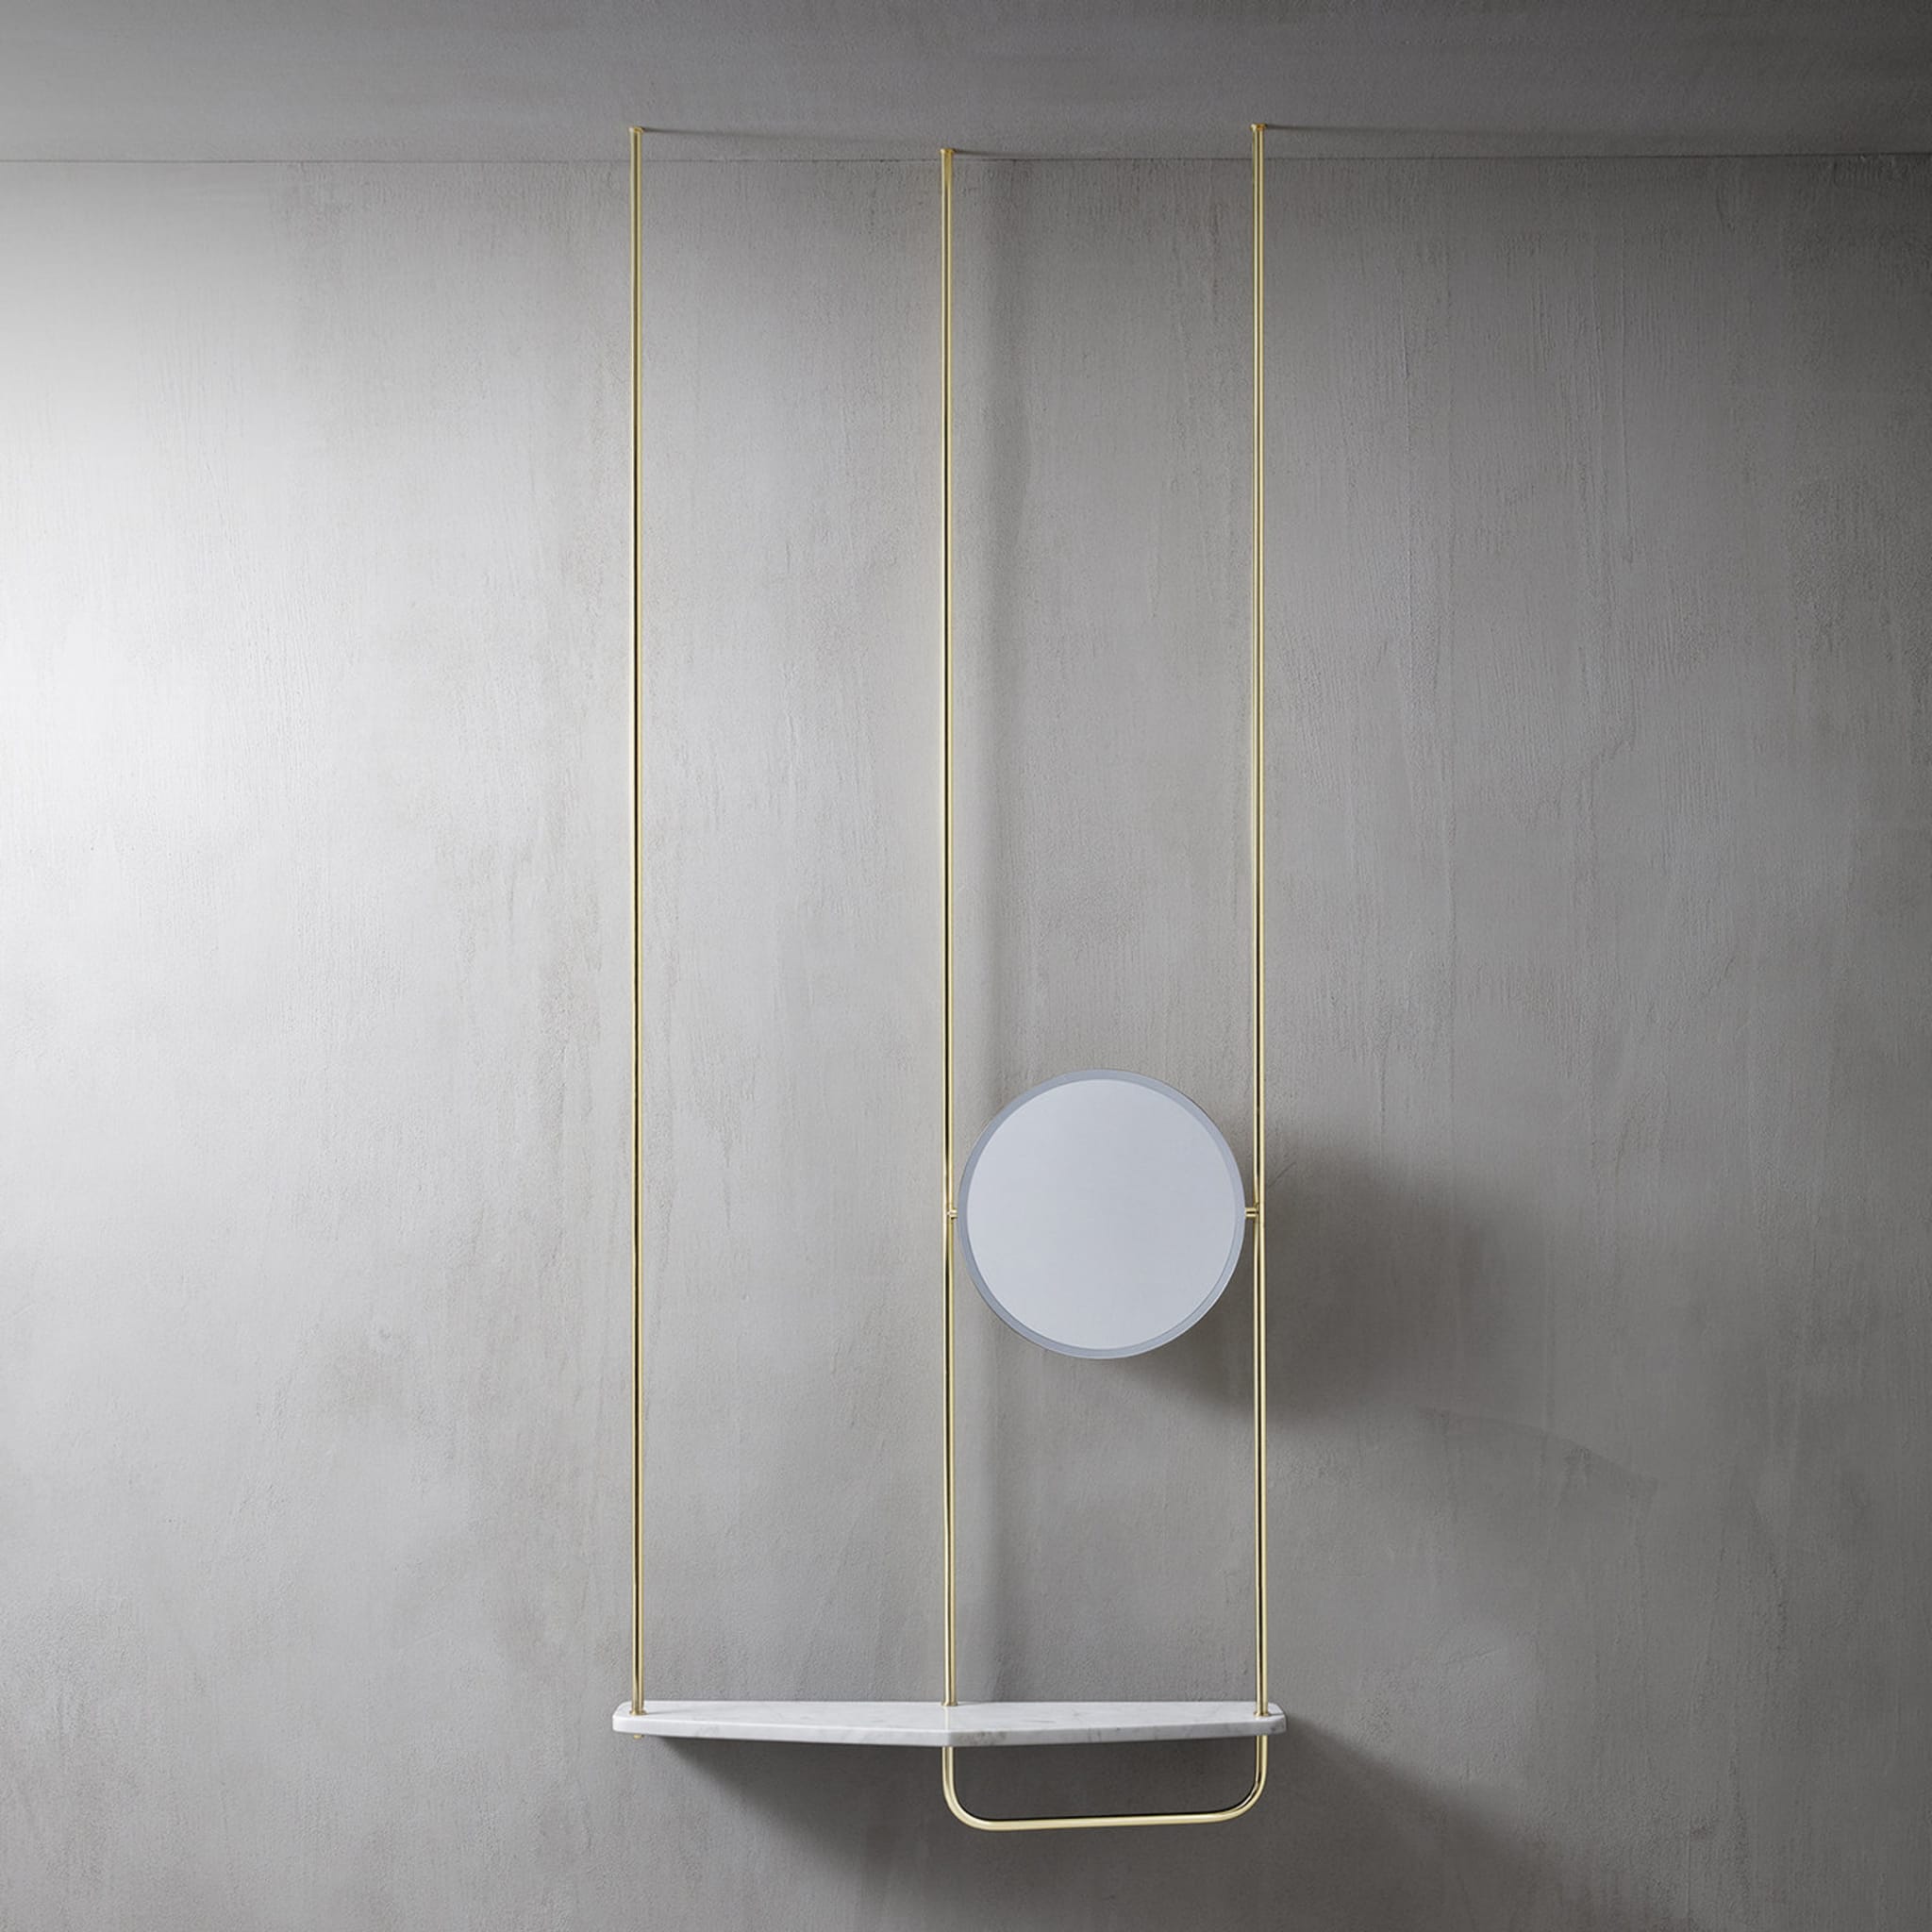 Make-up Hanging White Console by GoodMorning studio - Alternative view 3